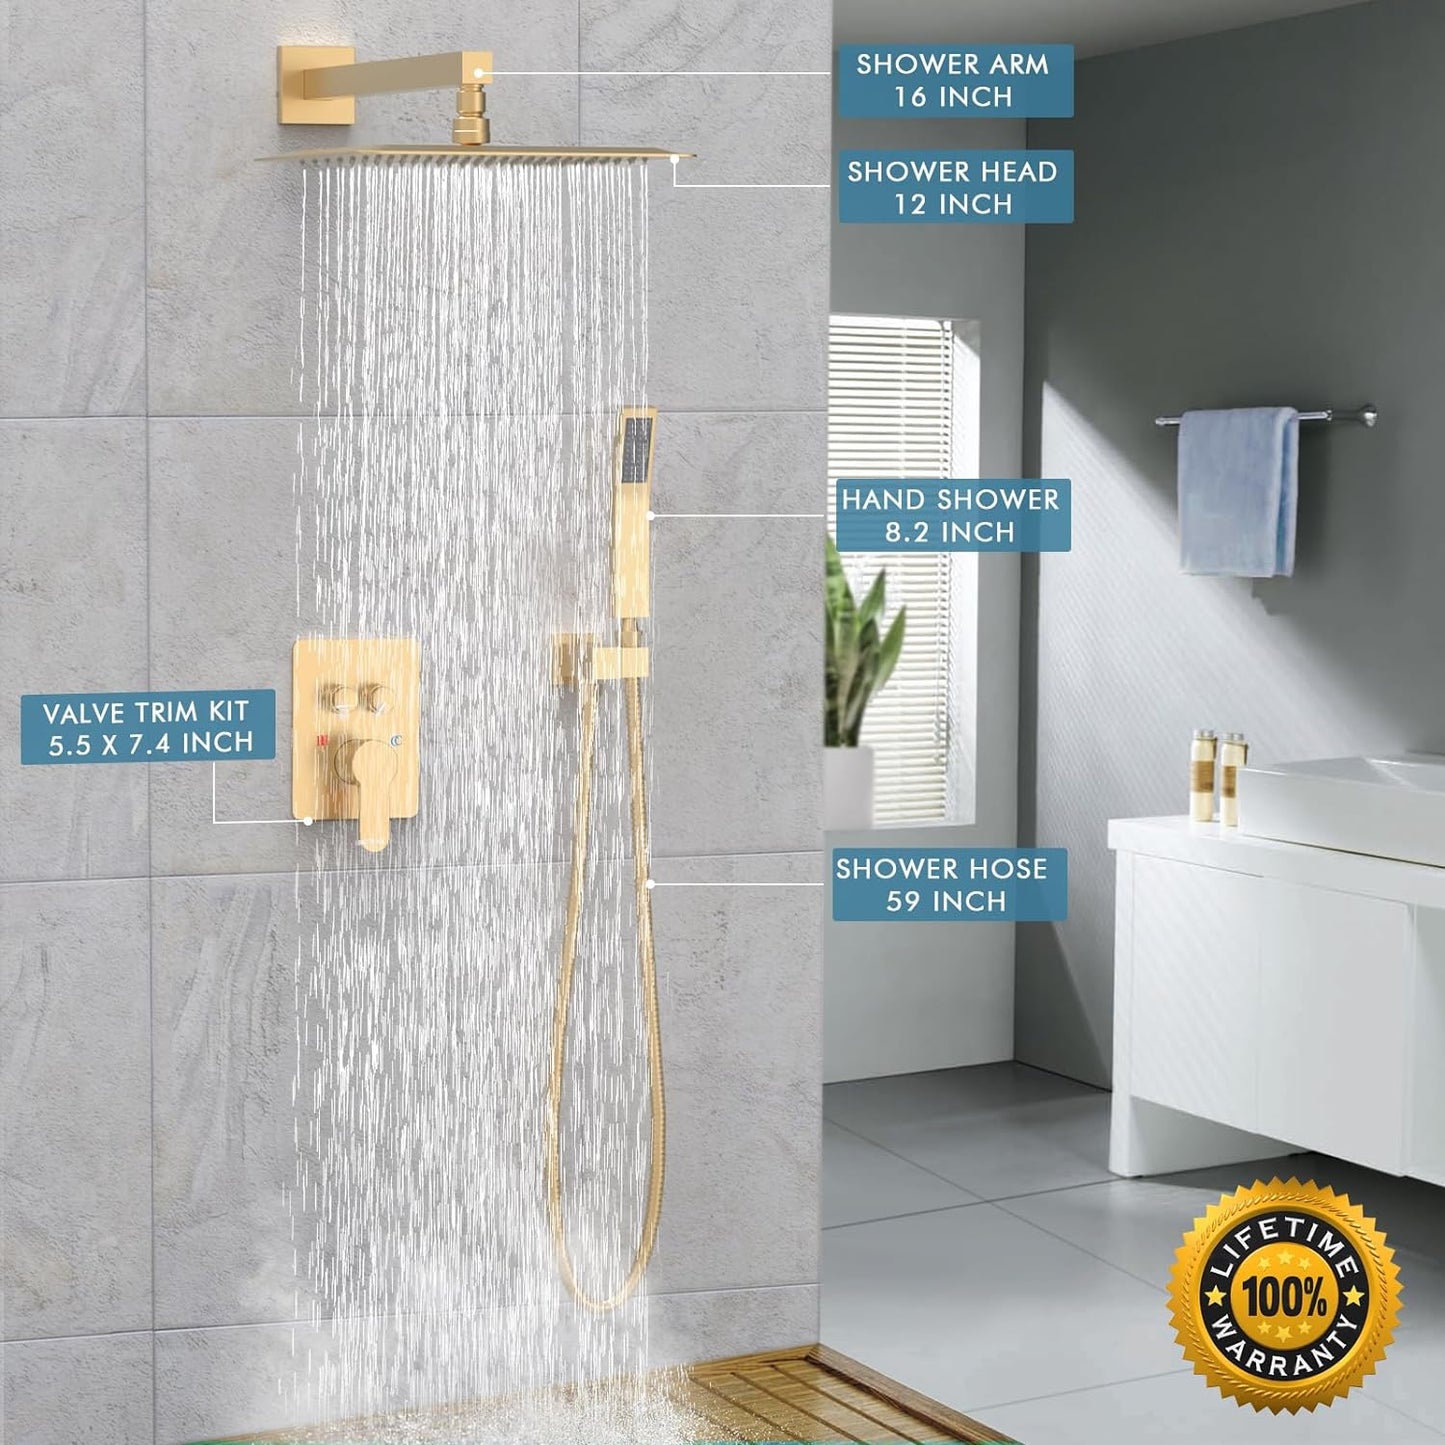 Gold Shower System Bostingner Shower Faucets Sets Complete with 12-Inch Rain Shower Head and Handheld Wall Mounted Push Button Shower Head Set Rough-in Brass Valve and Trim Kit Included (Br